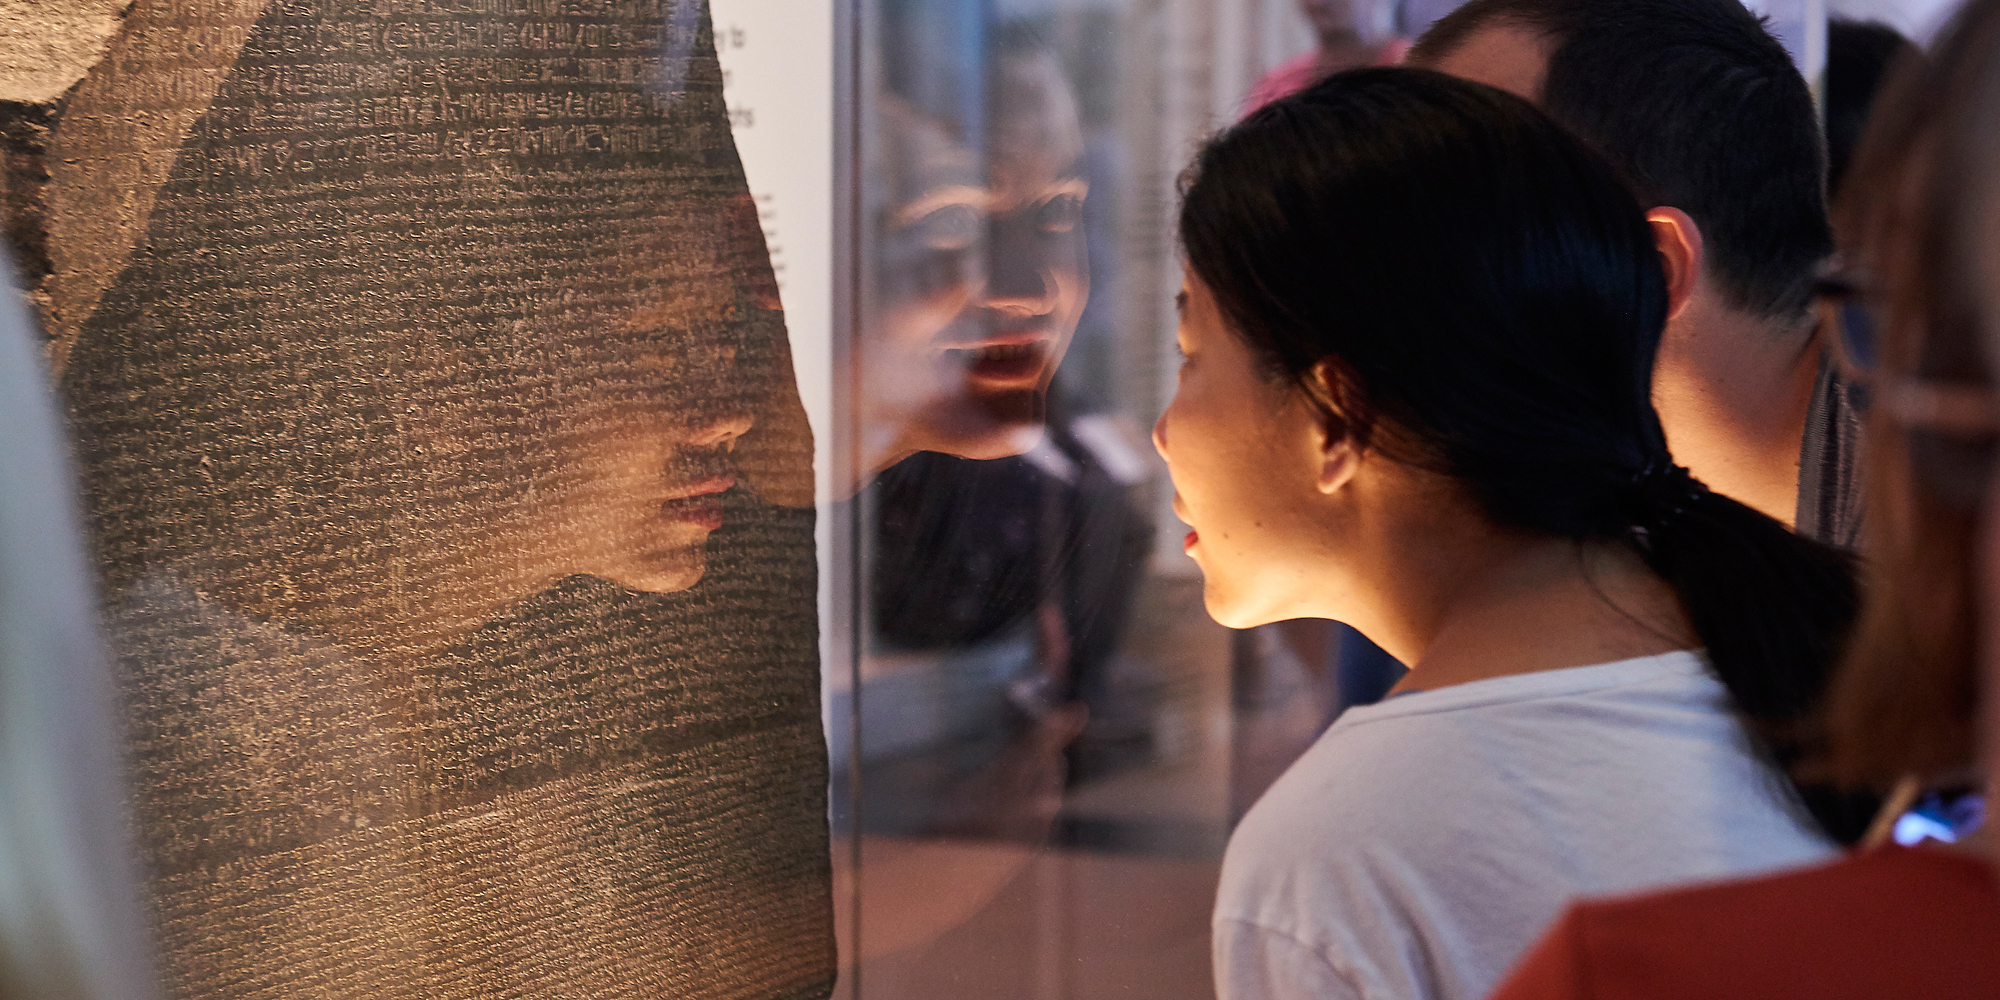 Two people looking at the Rosetta Stone in the British Museum